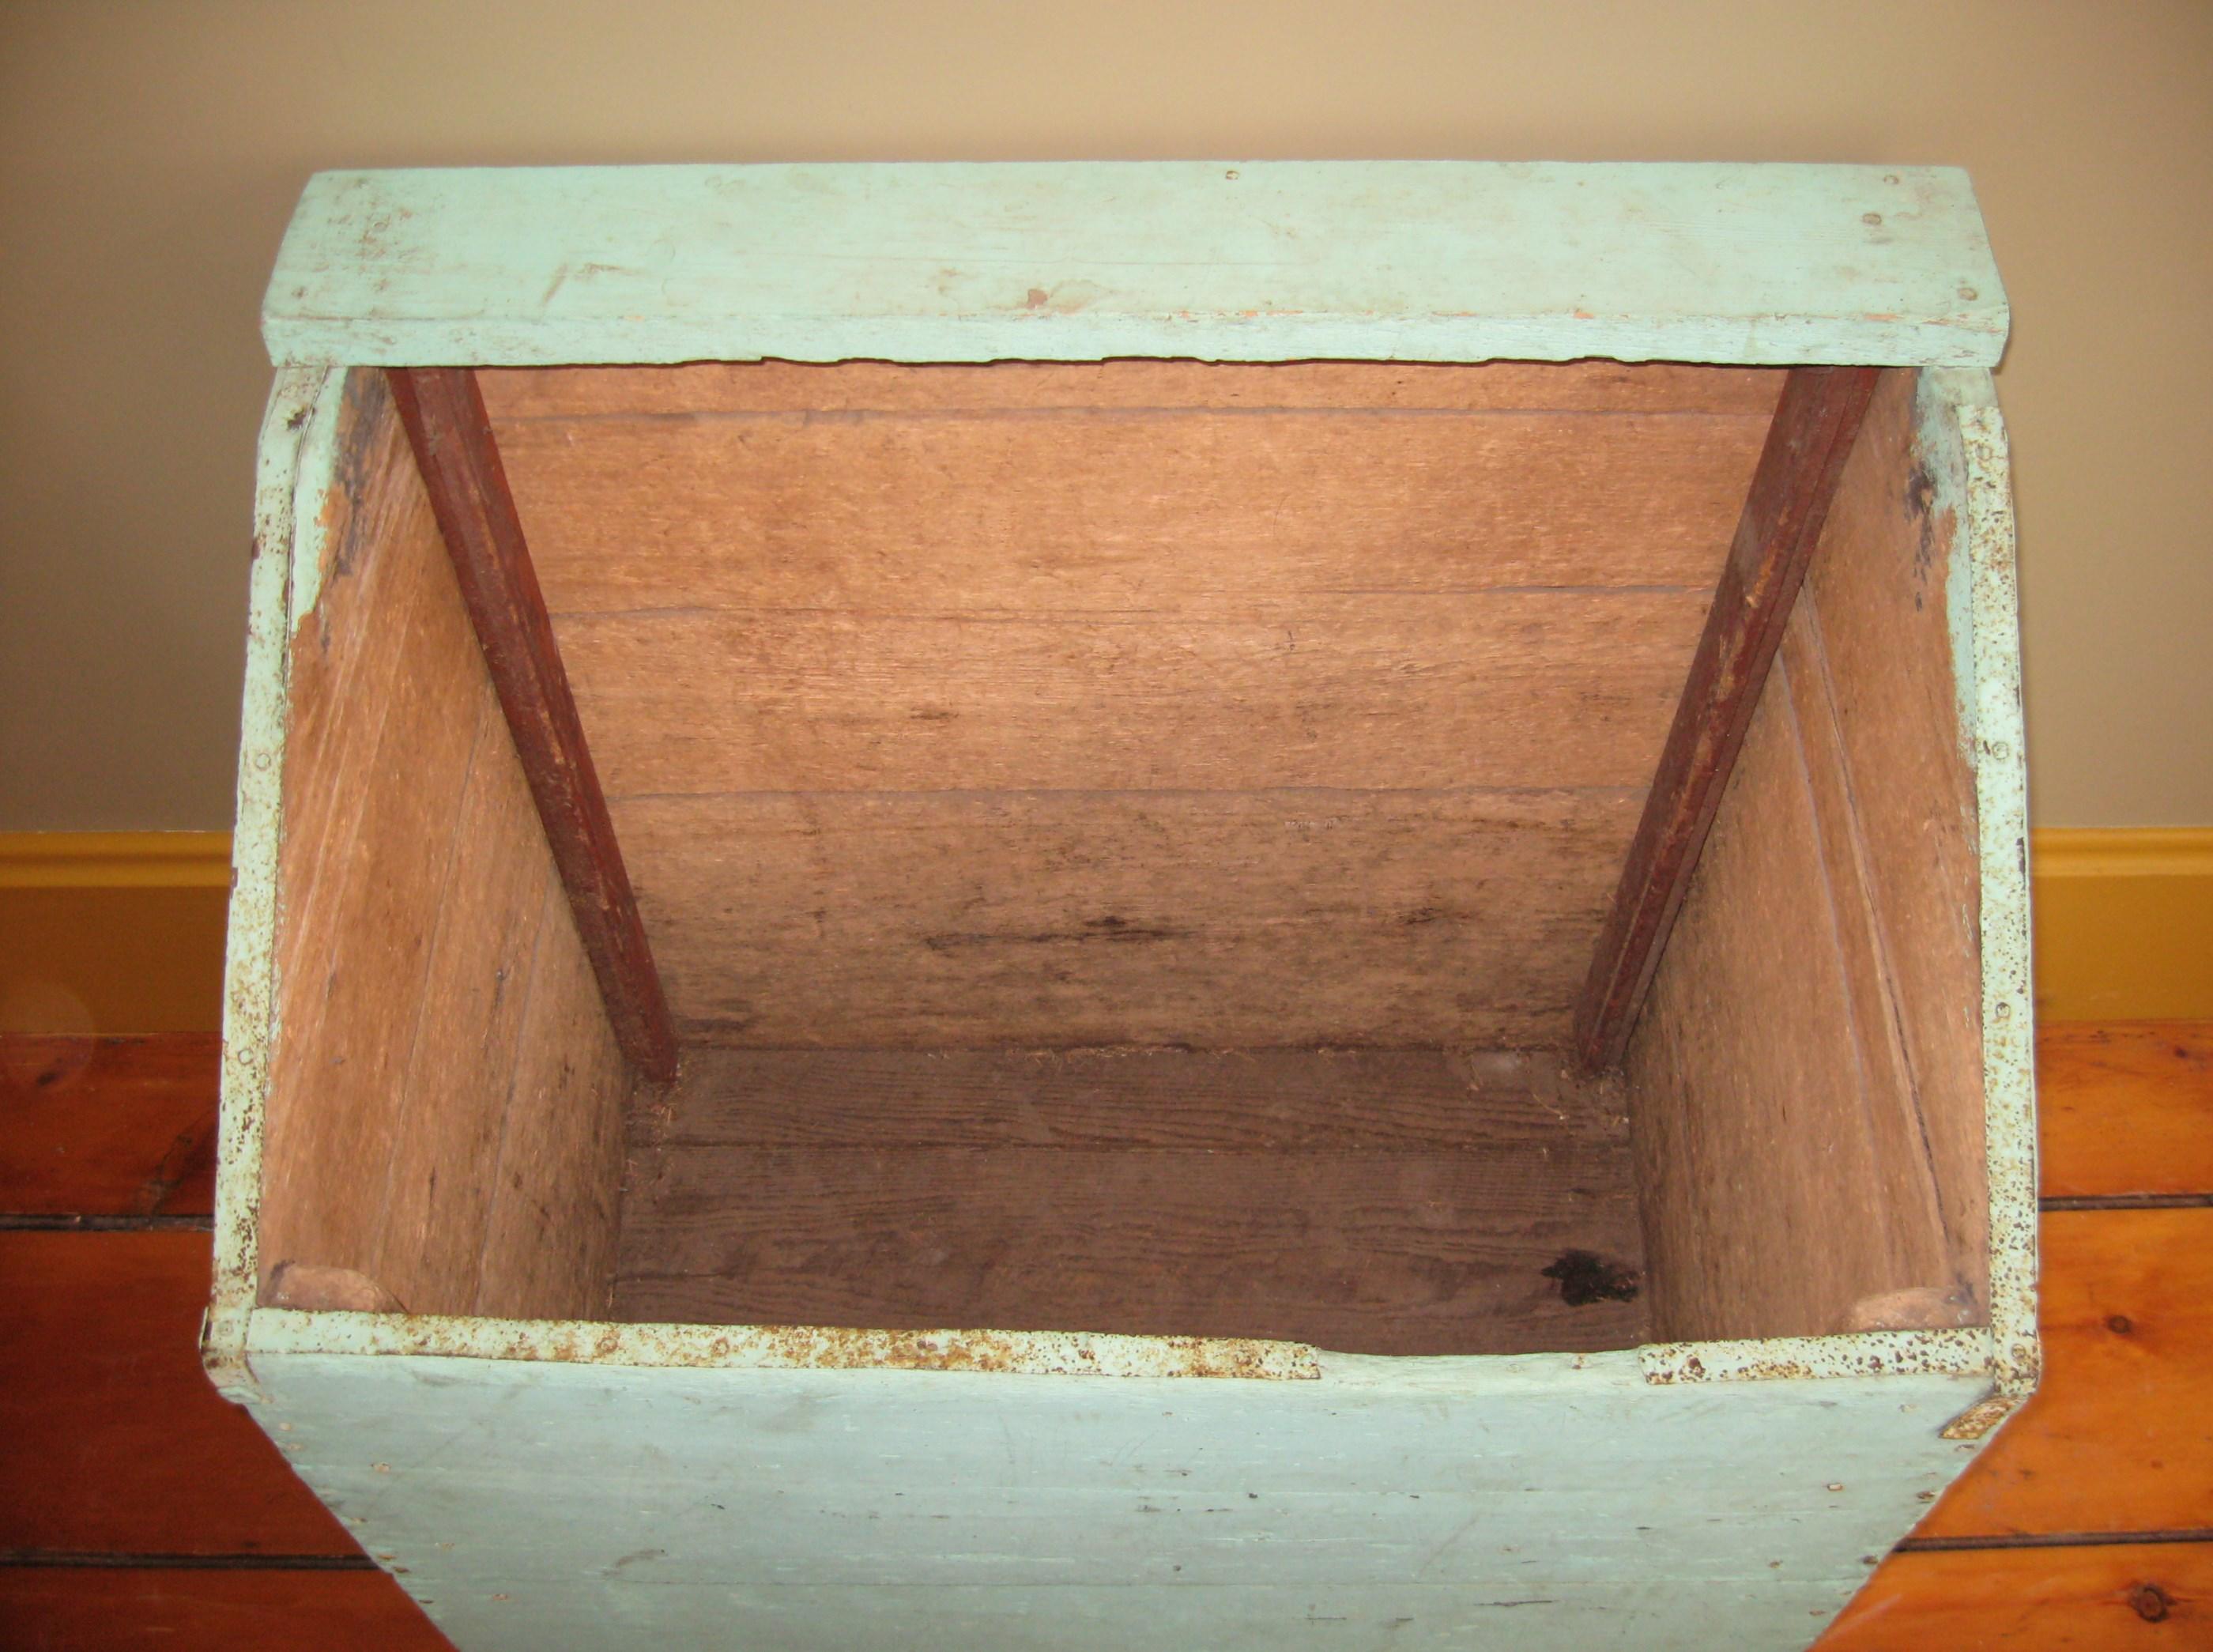 This is an early pine wooden box. Great for storing firewood. We used it as a recycling bin. Multi-functions with this great early pine box. Wonderful light green coloring on this! You don't find these anymore! A true antique piece that came out of